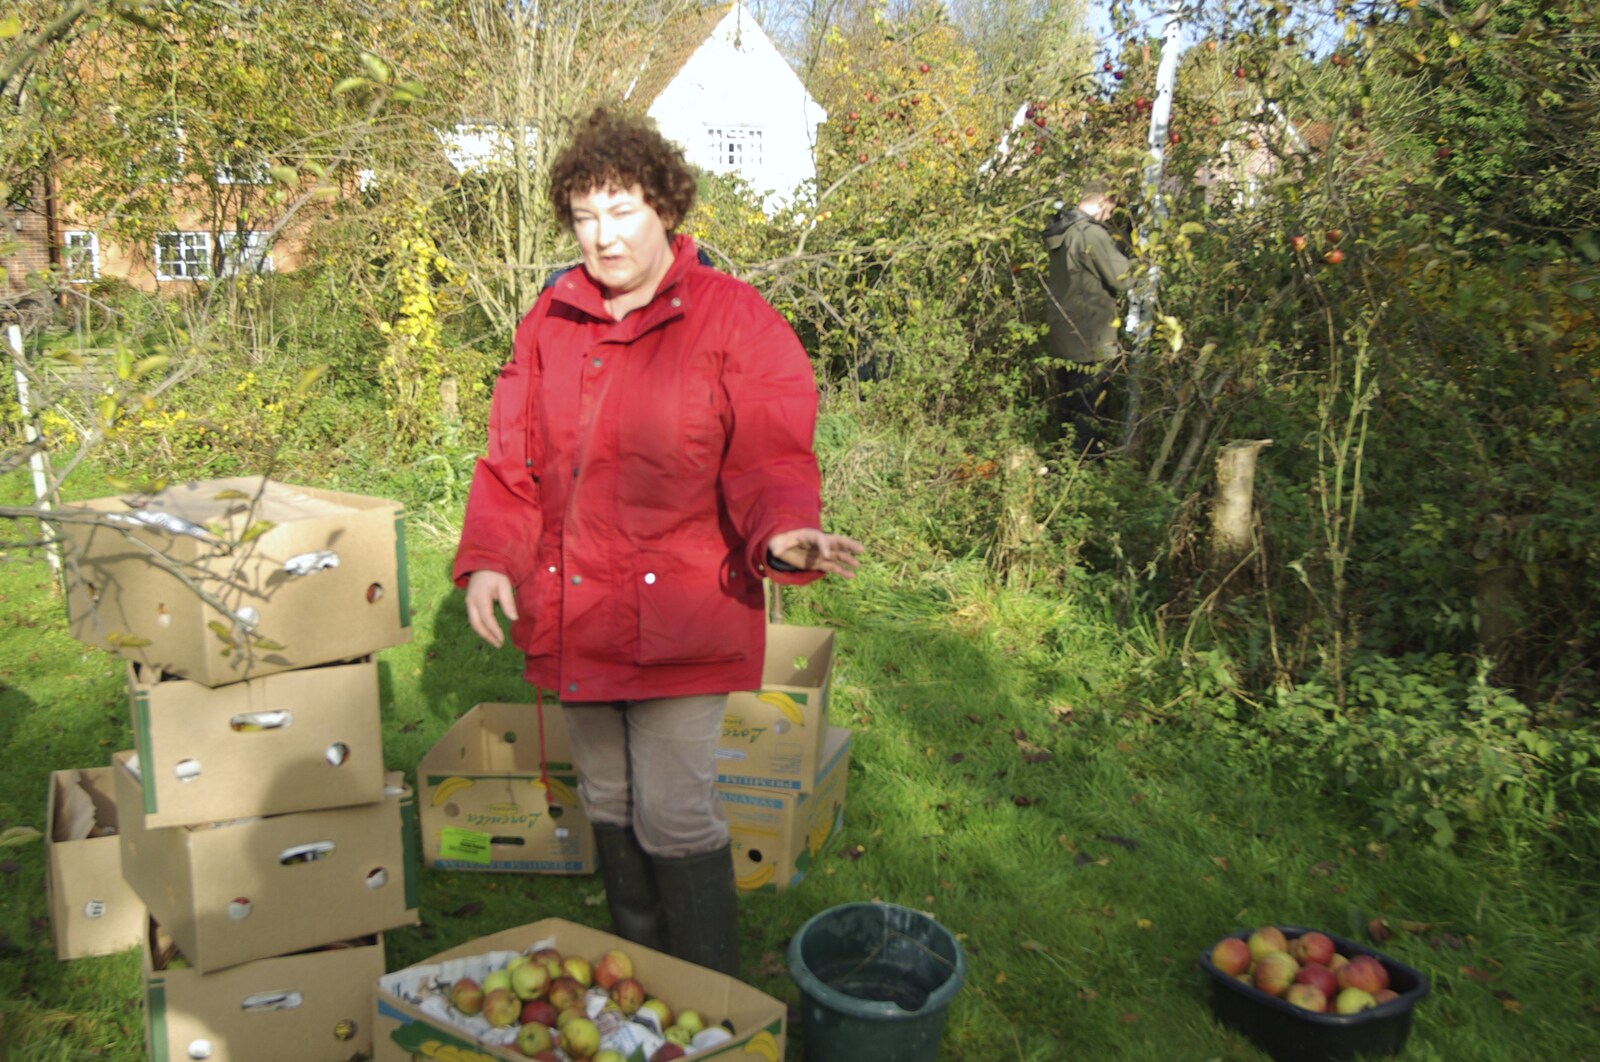 Louise lurks in the apple boxes from Bill and Carmen's Post-Wedding Thrash, Yaxley Cherry Tree, Suffolk - 8th November 2008